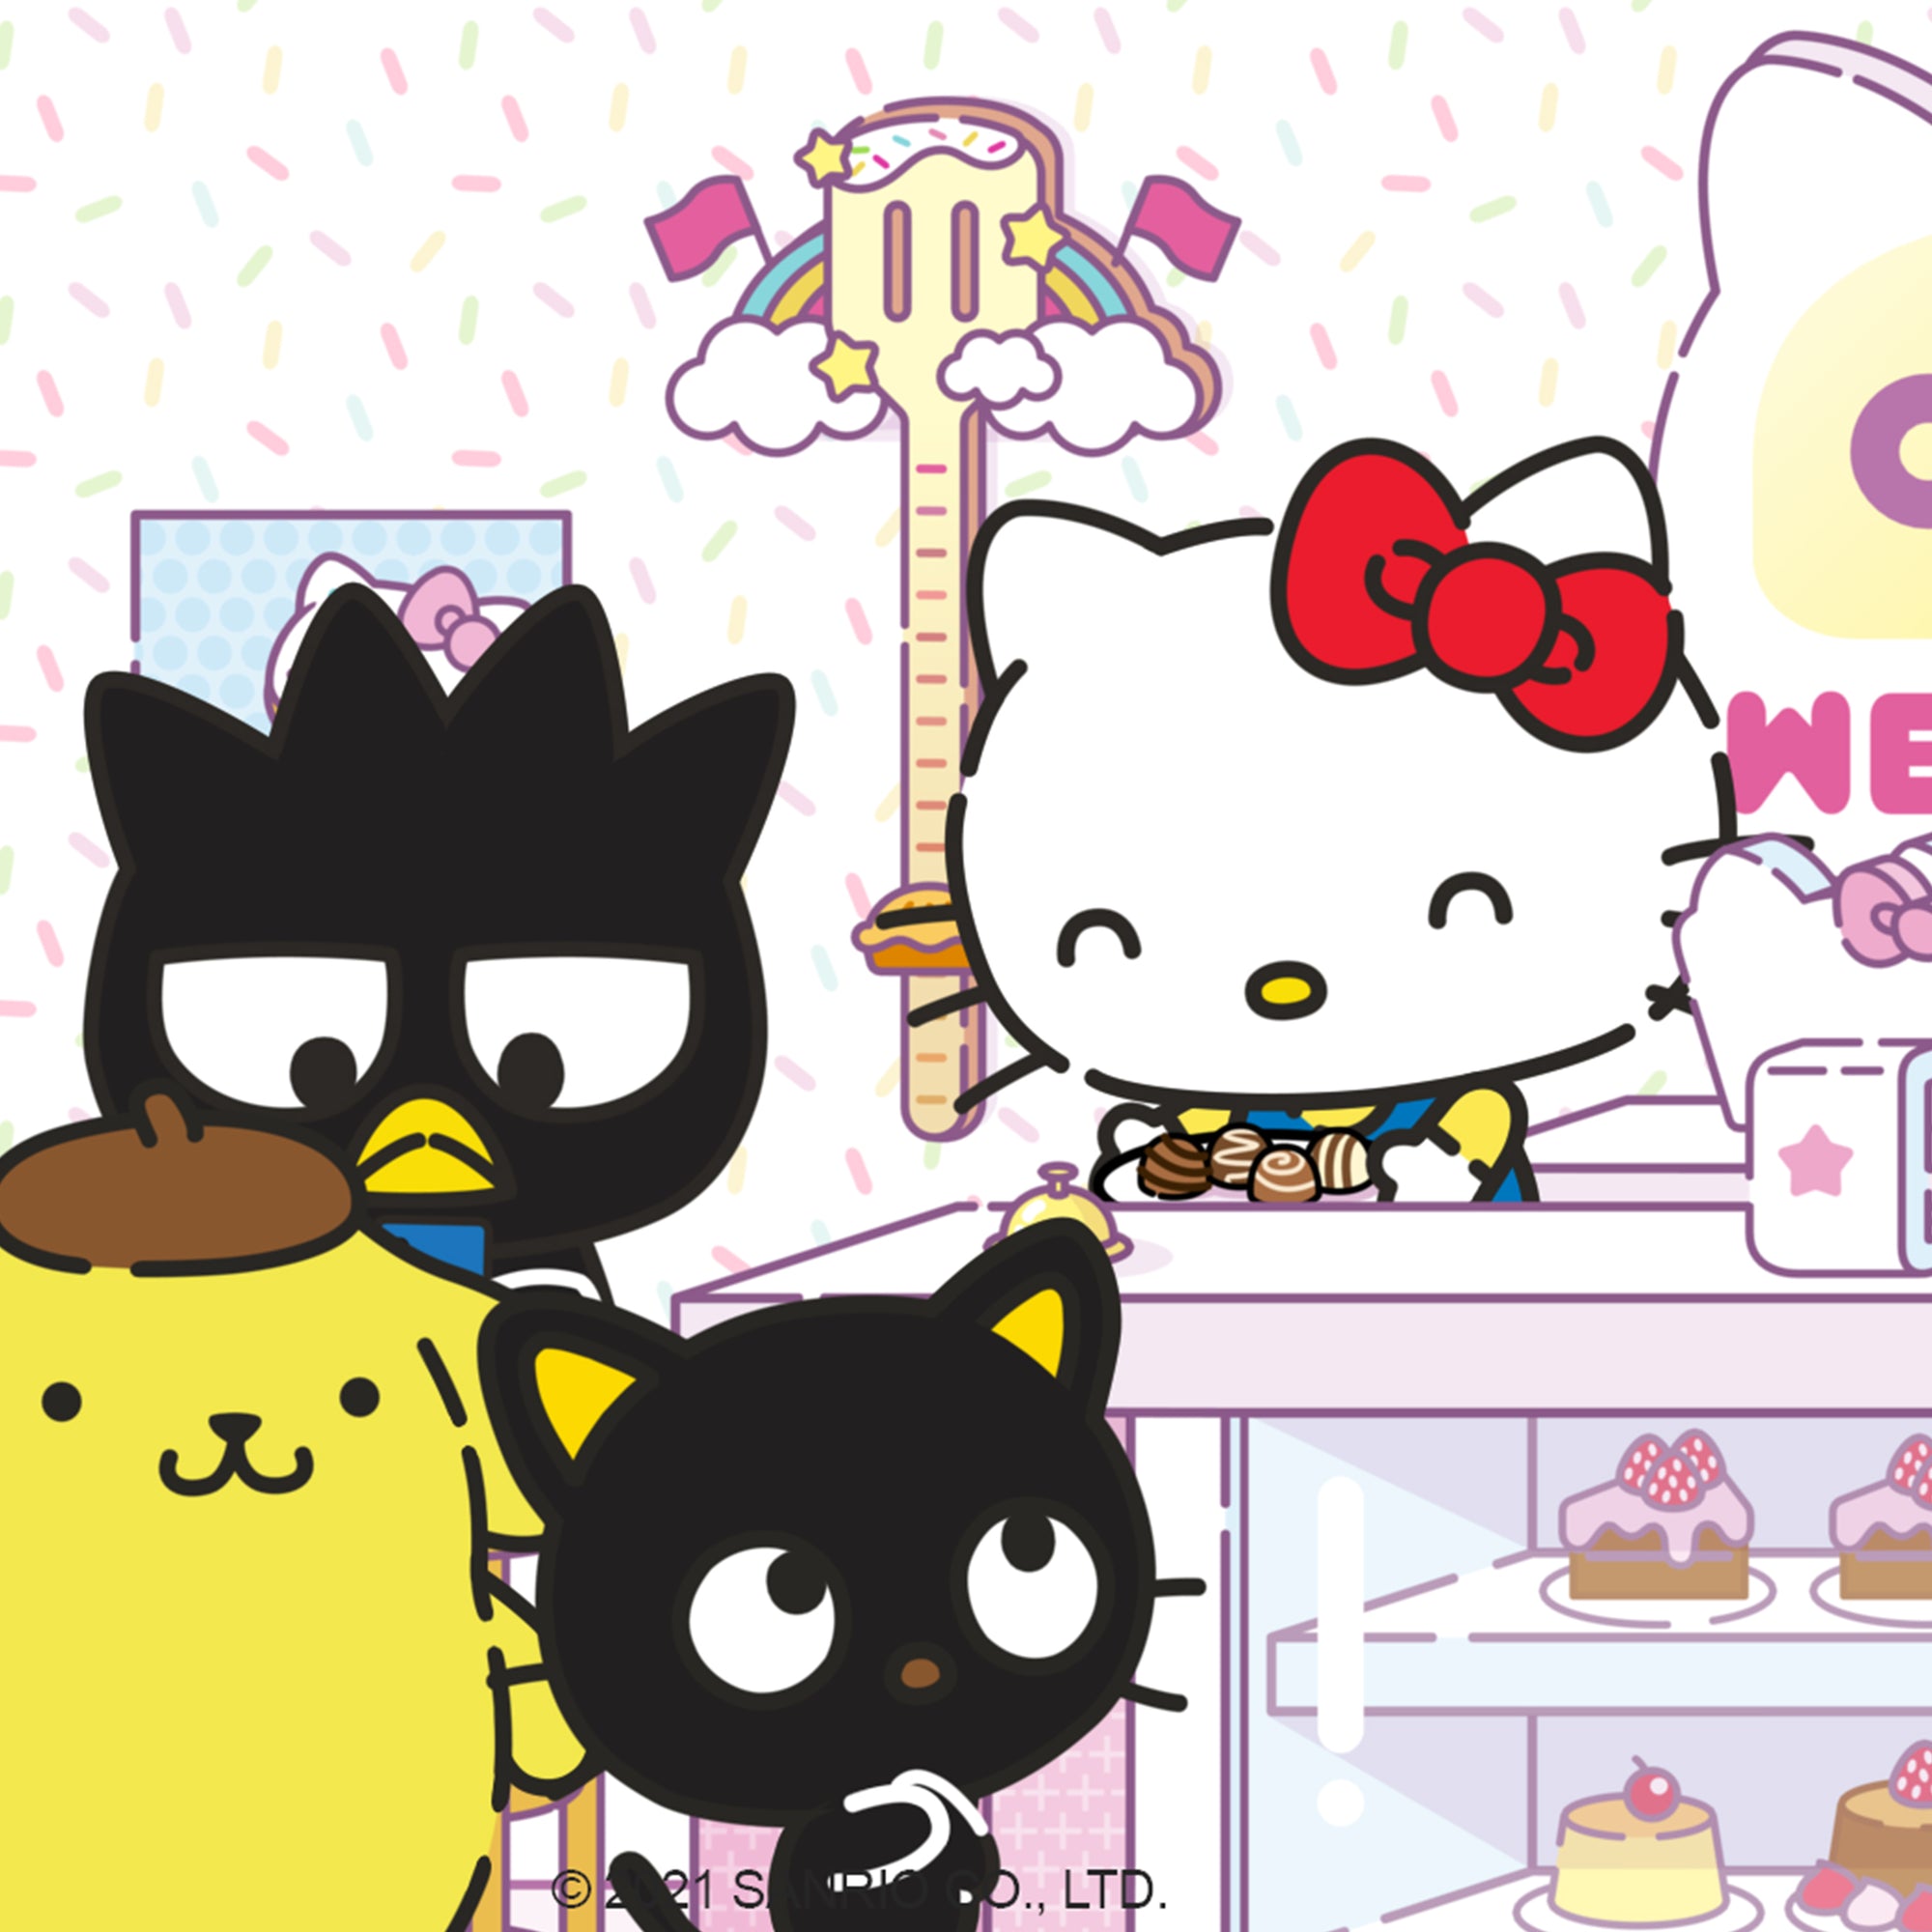 Hello Friend! Meet Denise Downer, writer of Hello Kitty and Friends Supercute Adventures